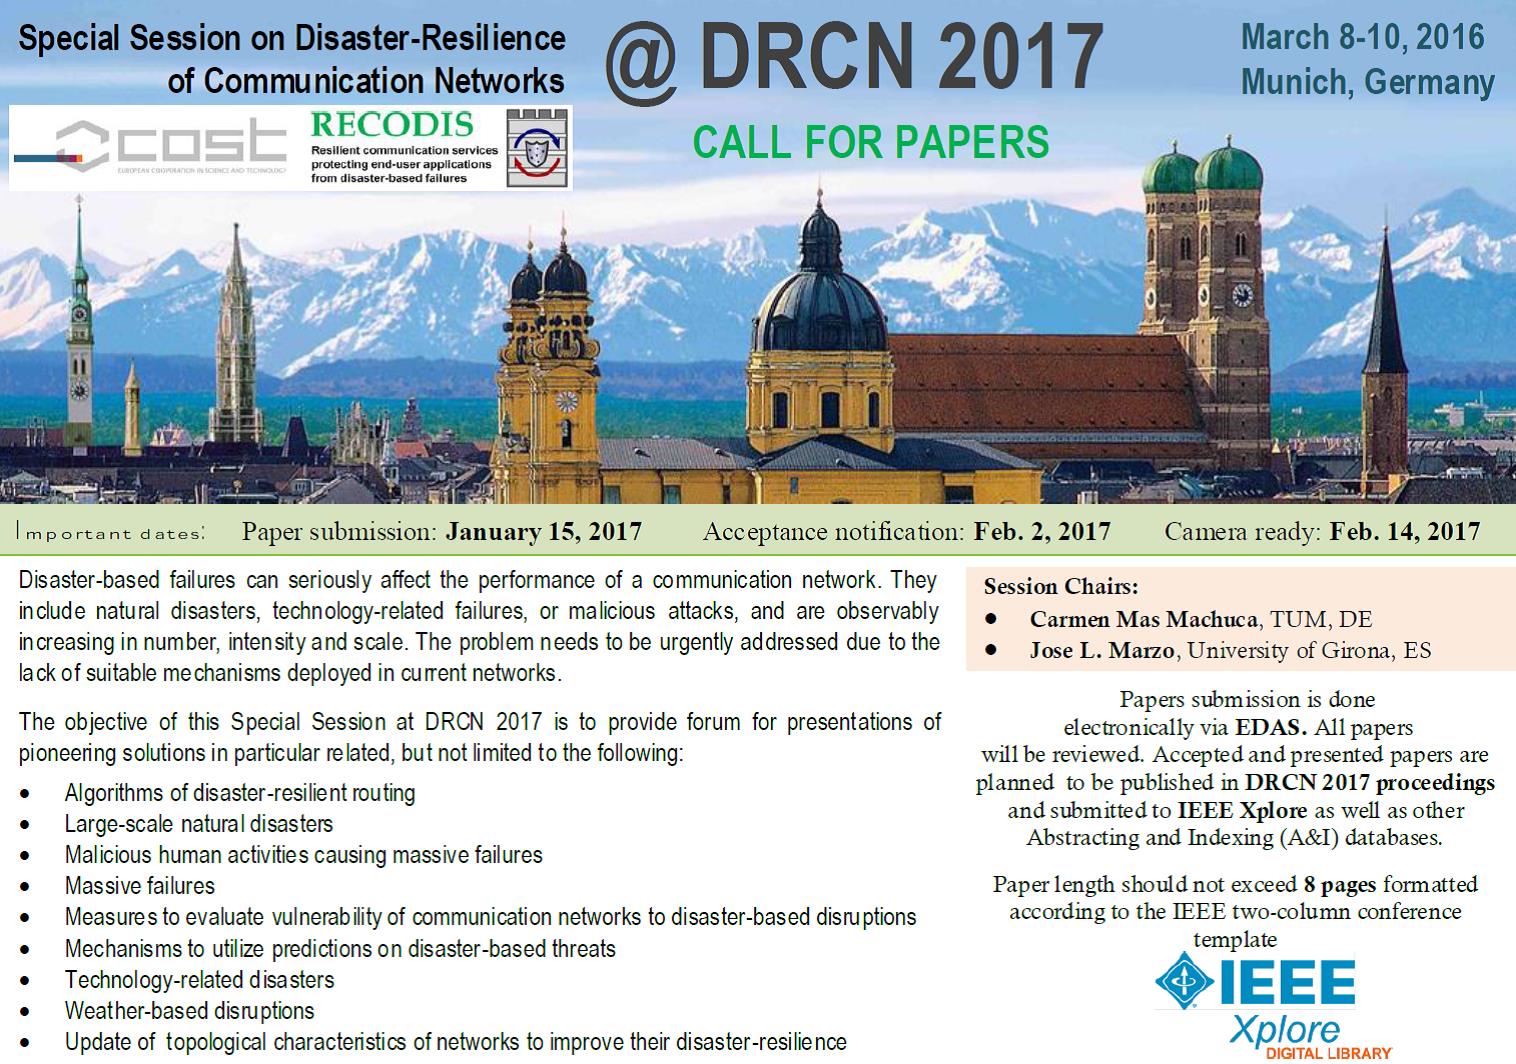 Call for Paper for subconference RECORDIS at DRCN 2017